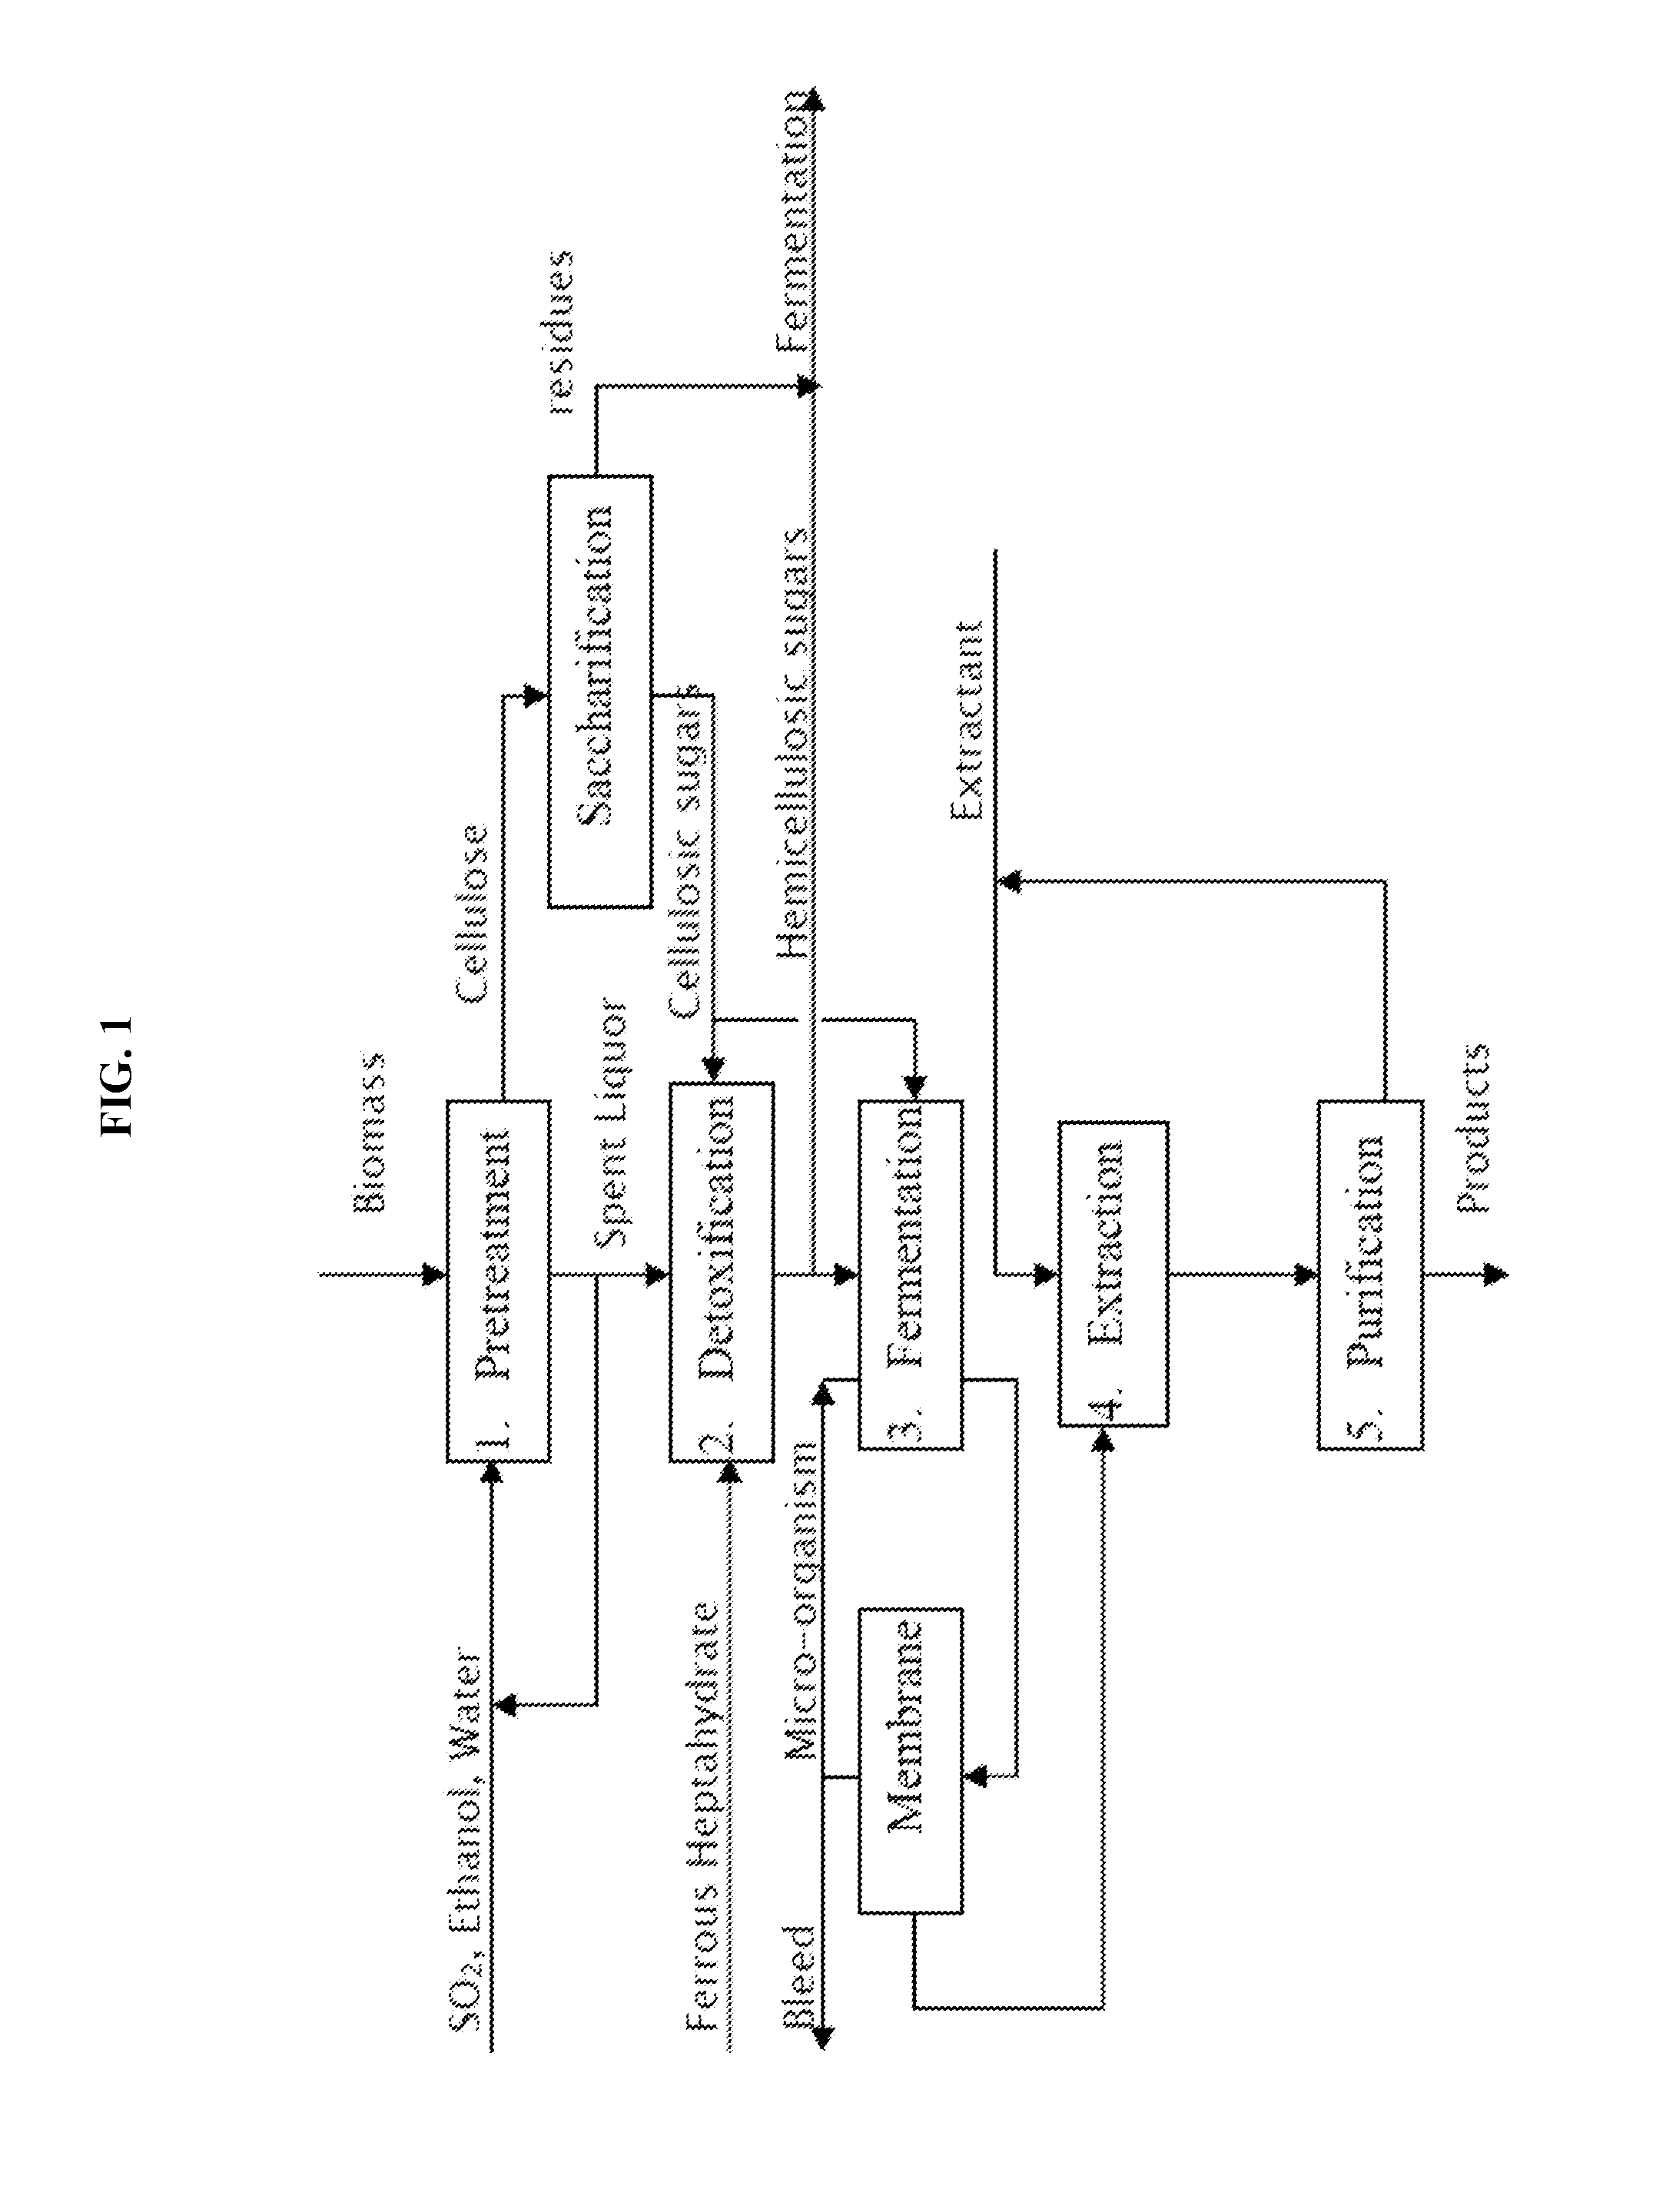 Processes for fermentation of lignocellulosic glucose to aliphatic alcohols or acids